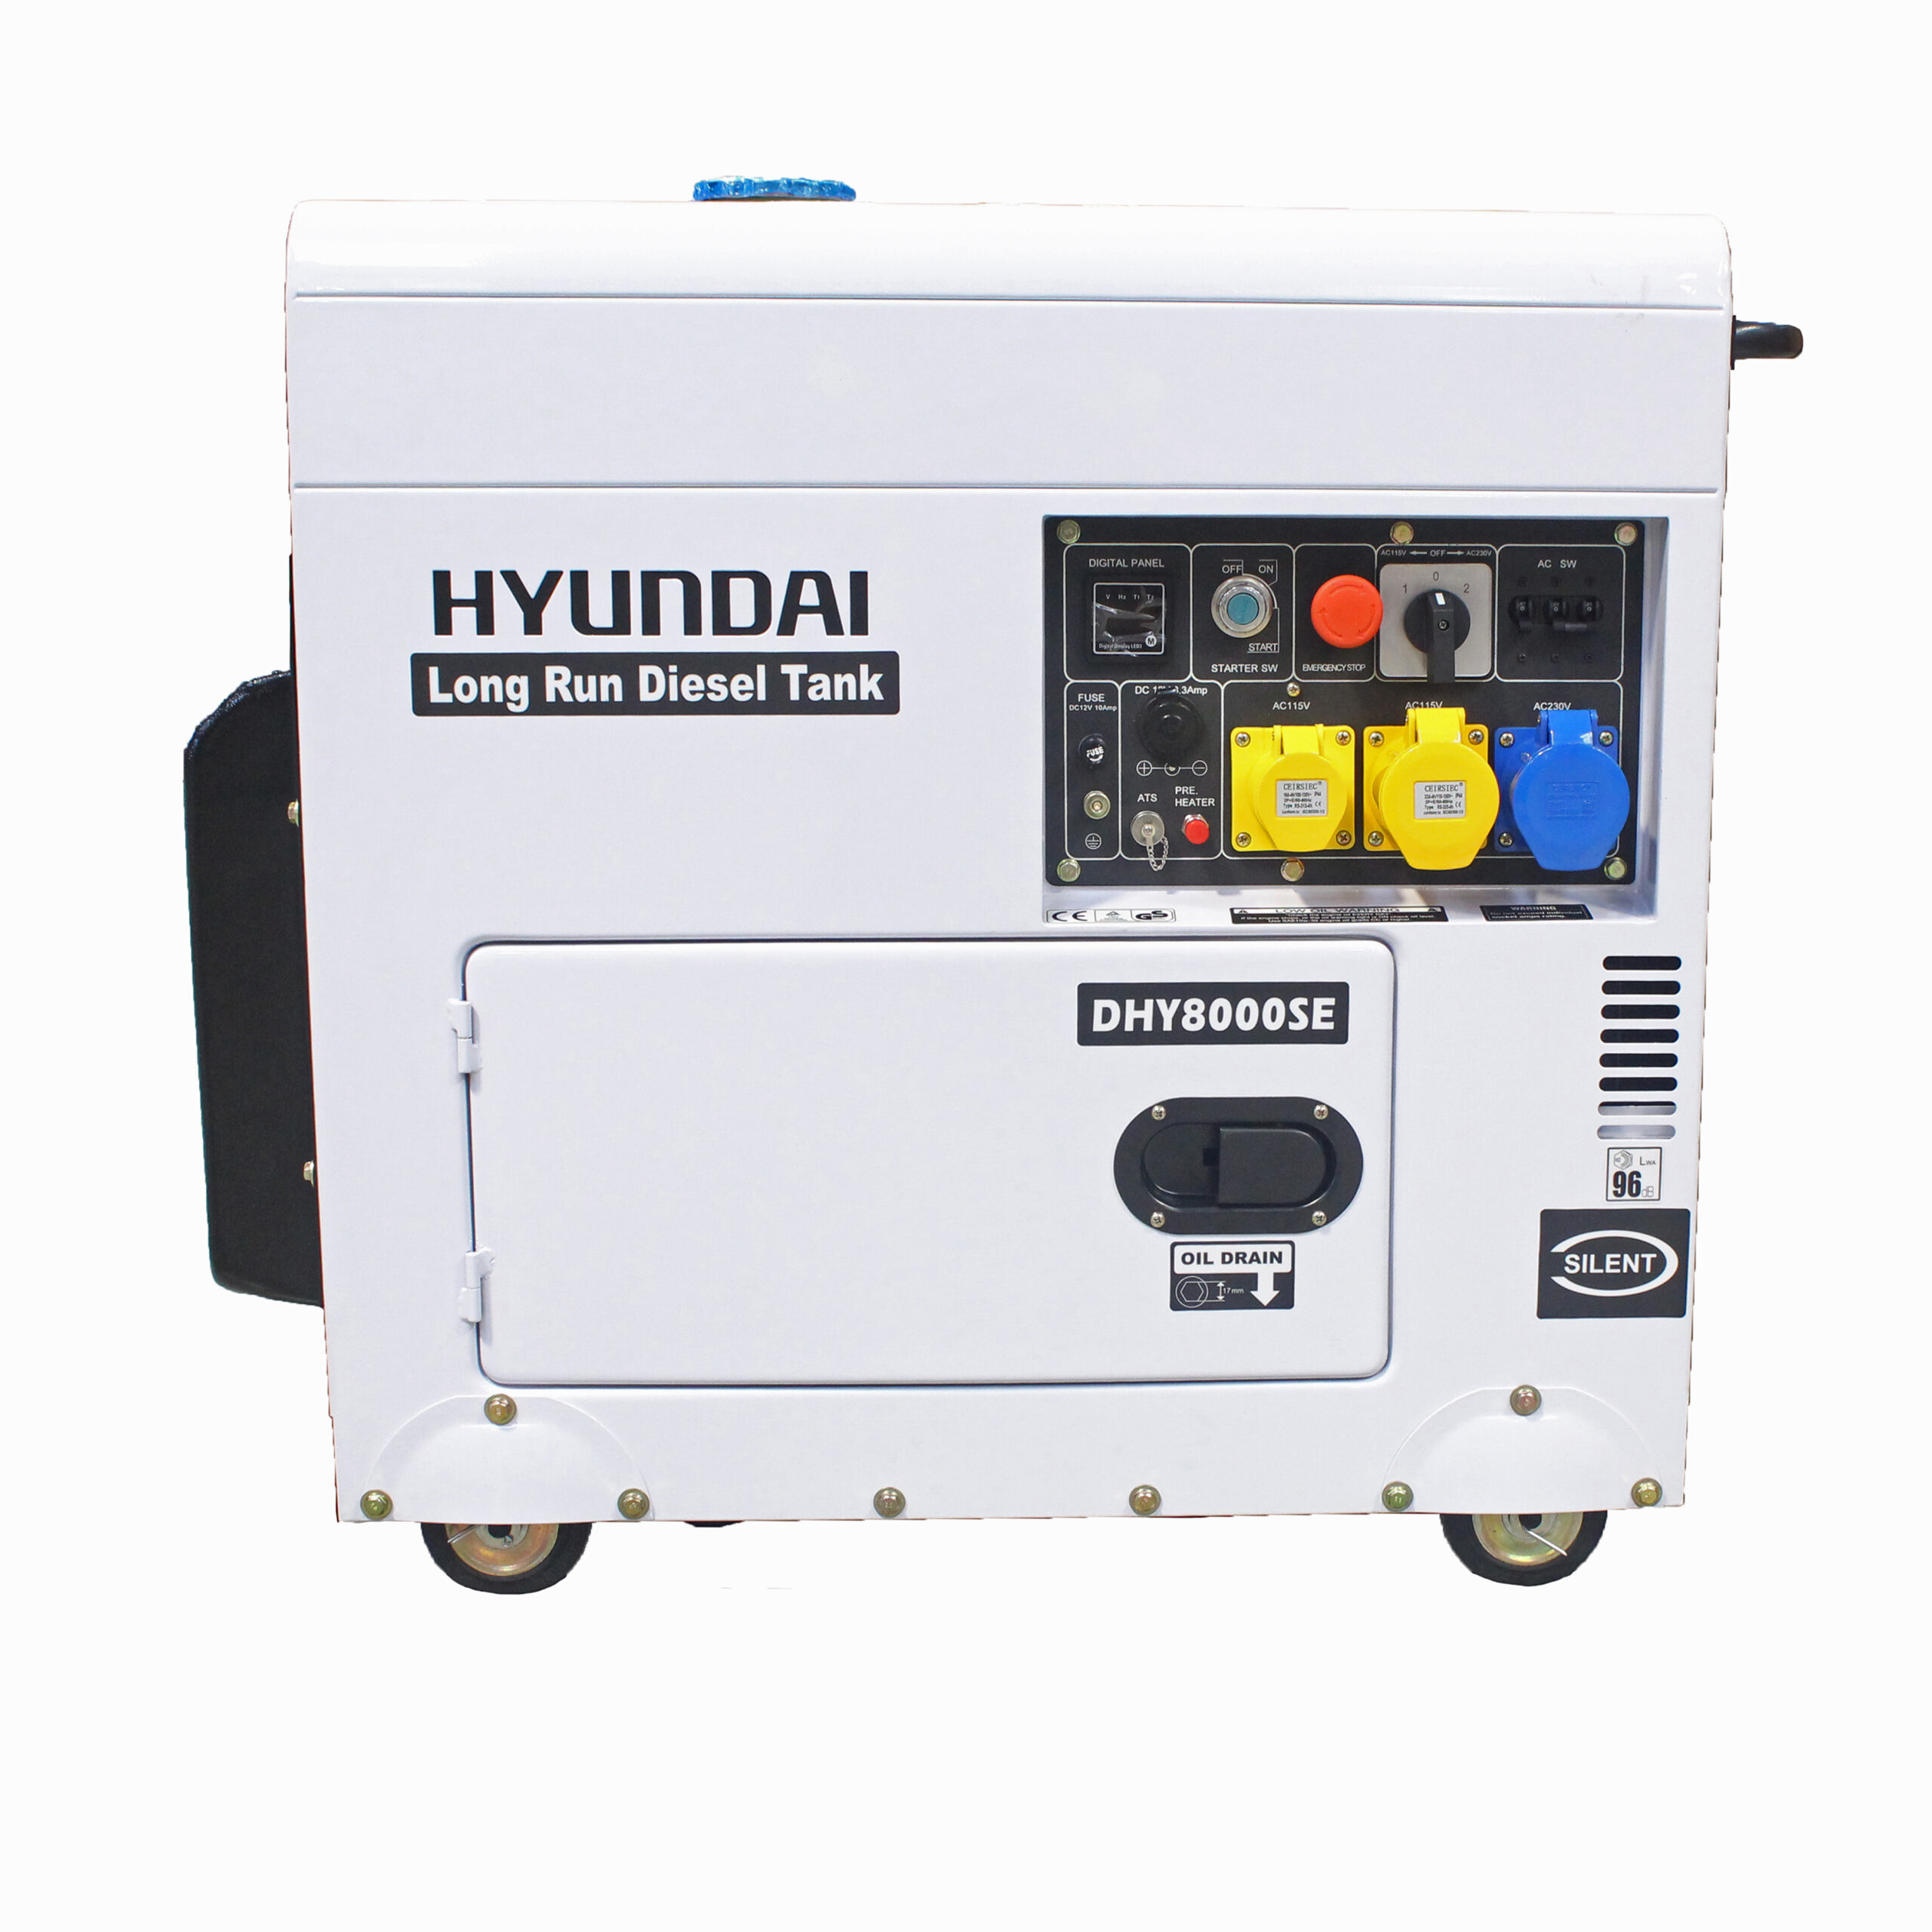 Hyundai 28kW / 35kVA* Single Phase, 230v Diesel Generator, 1500rpm  Water-cooled Slow Running Genset, Silenced Canopy